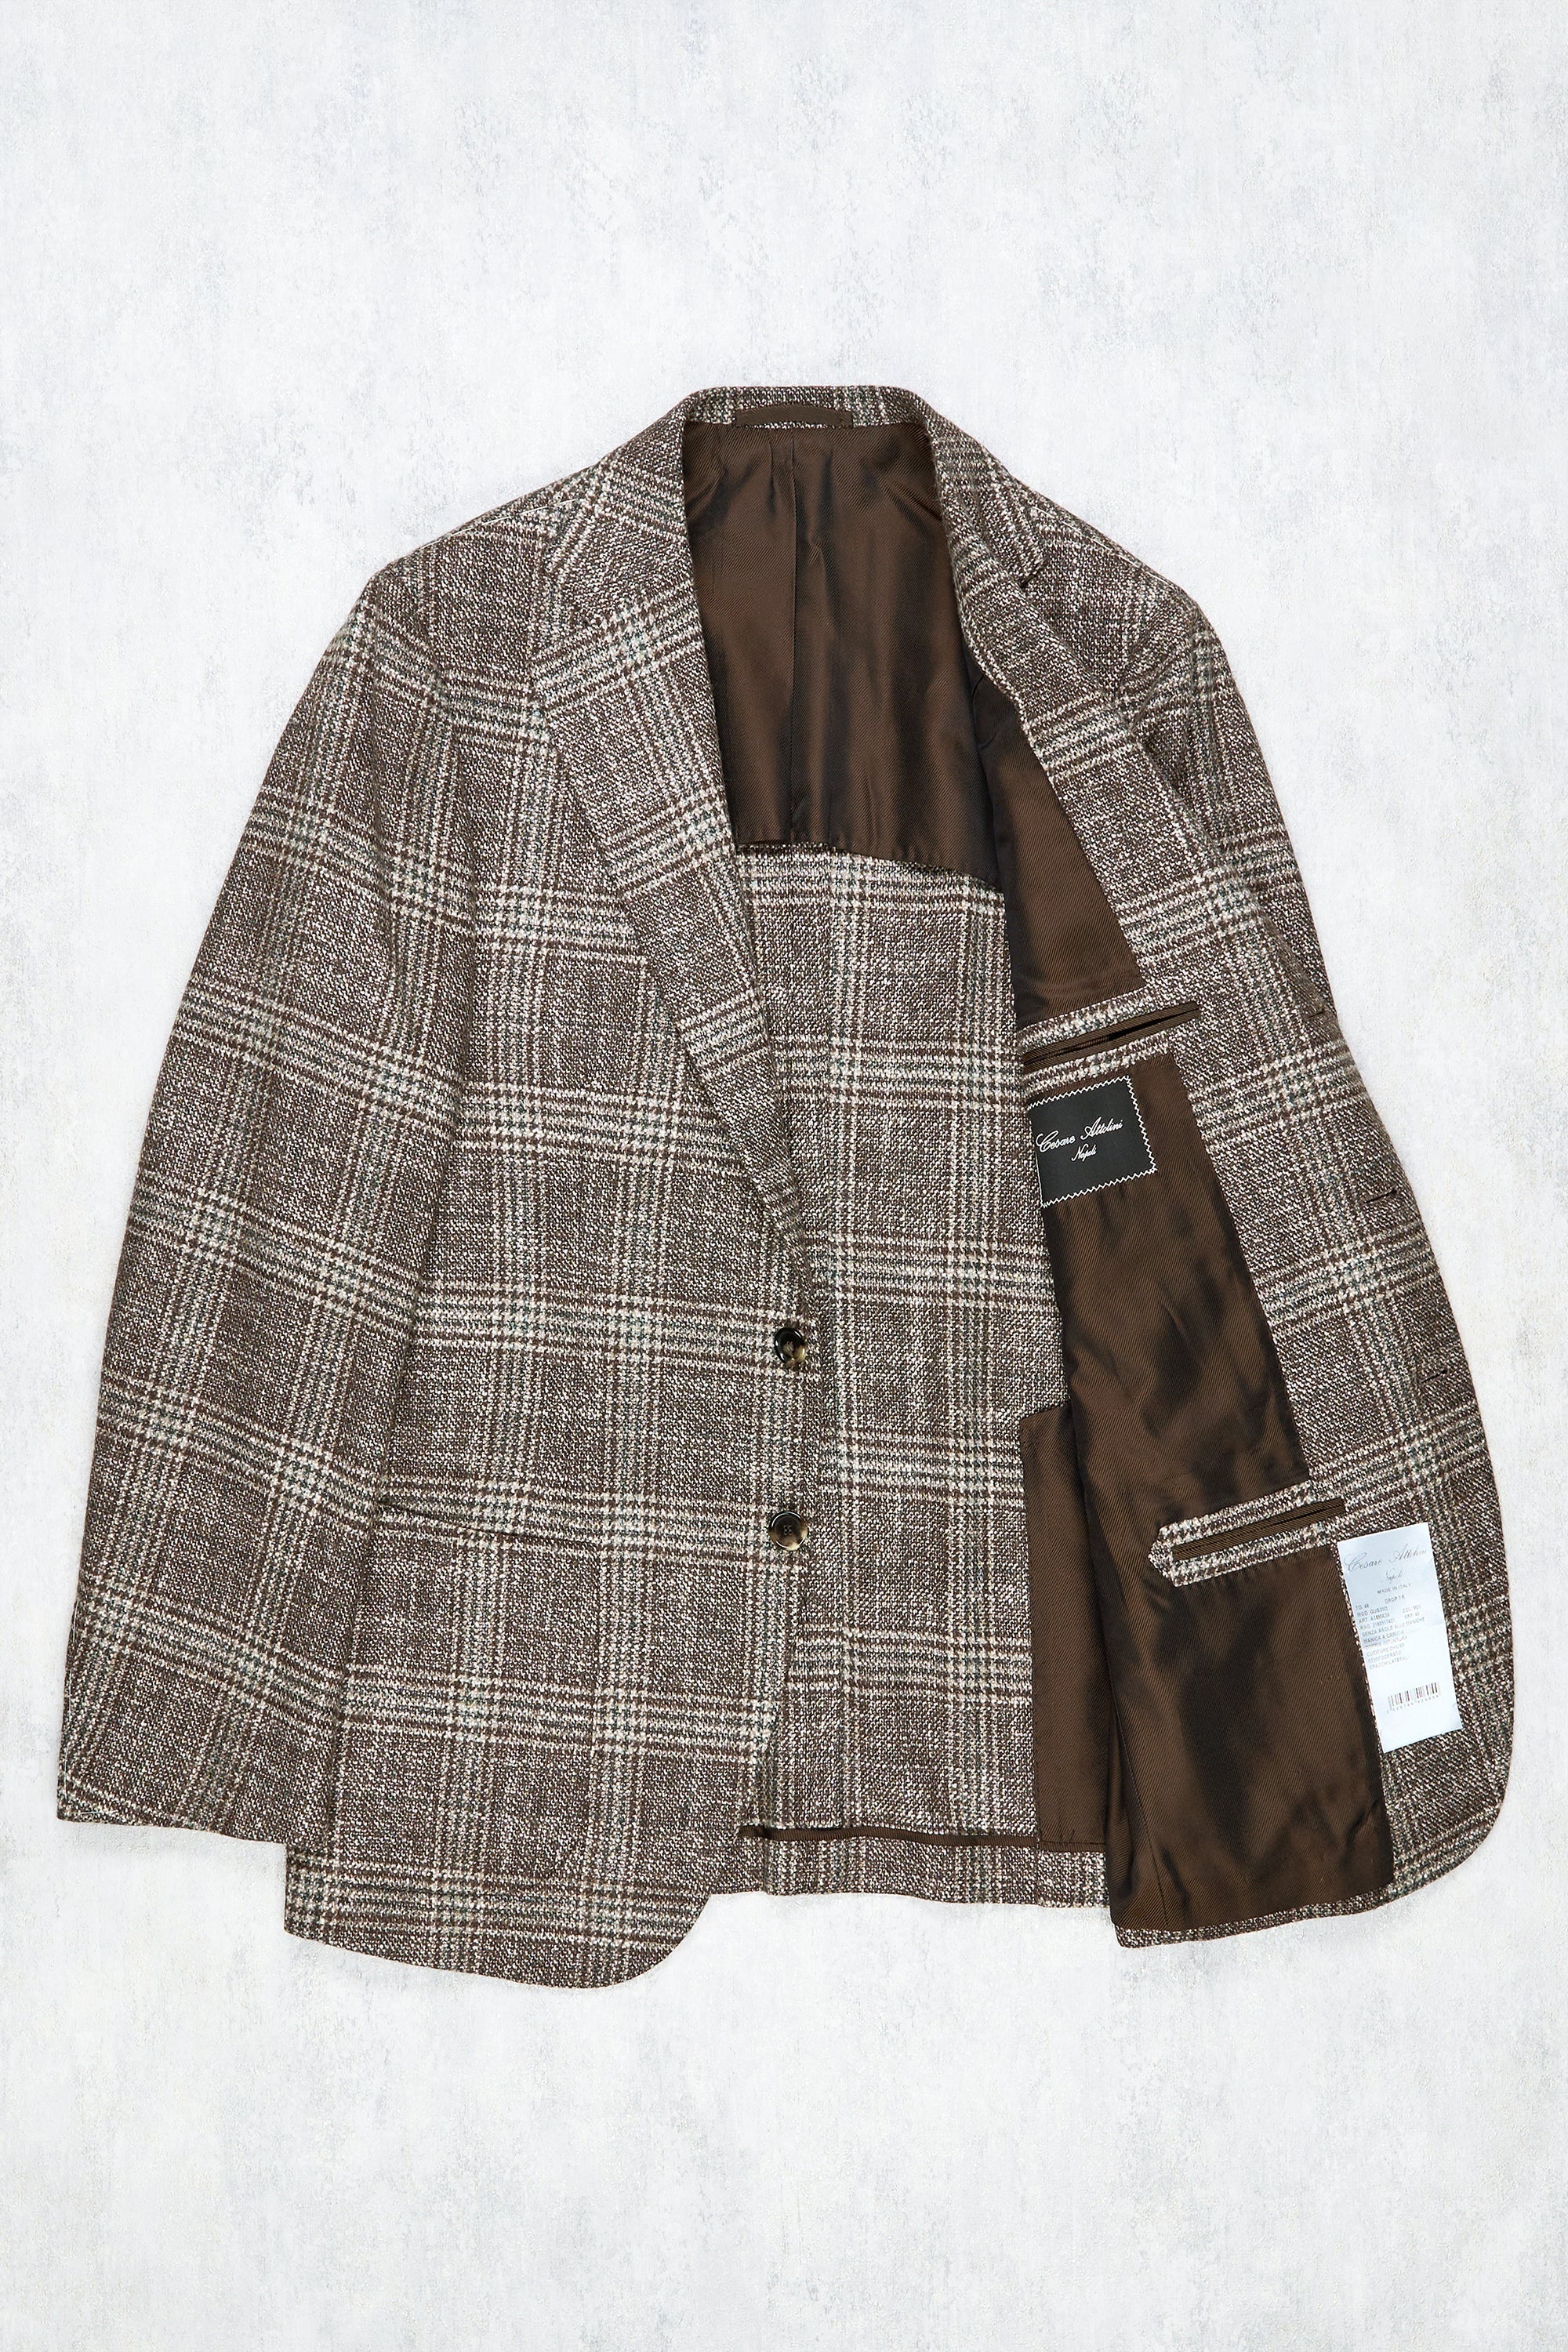 Cesare Attolini Brown with Green Check Wool/Silk Sport Coat